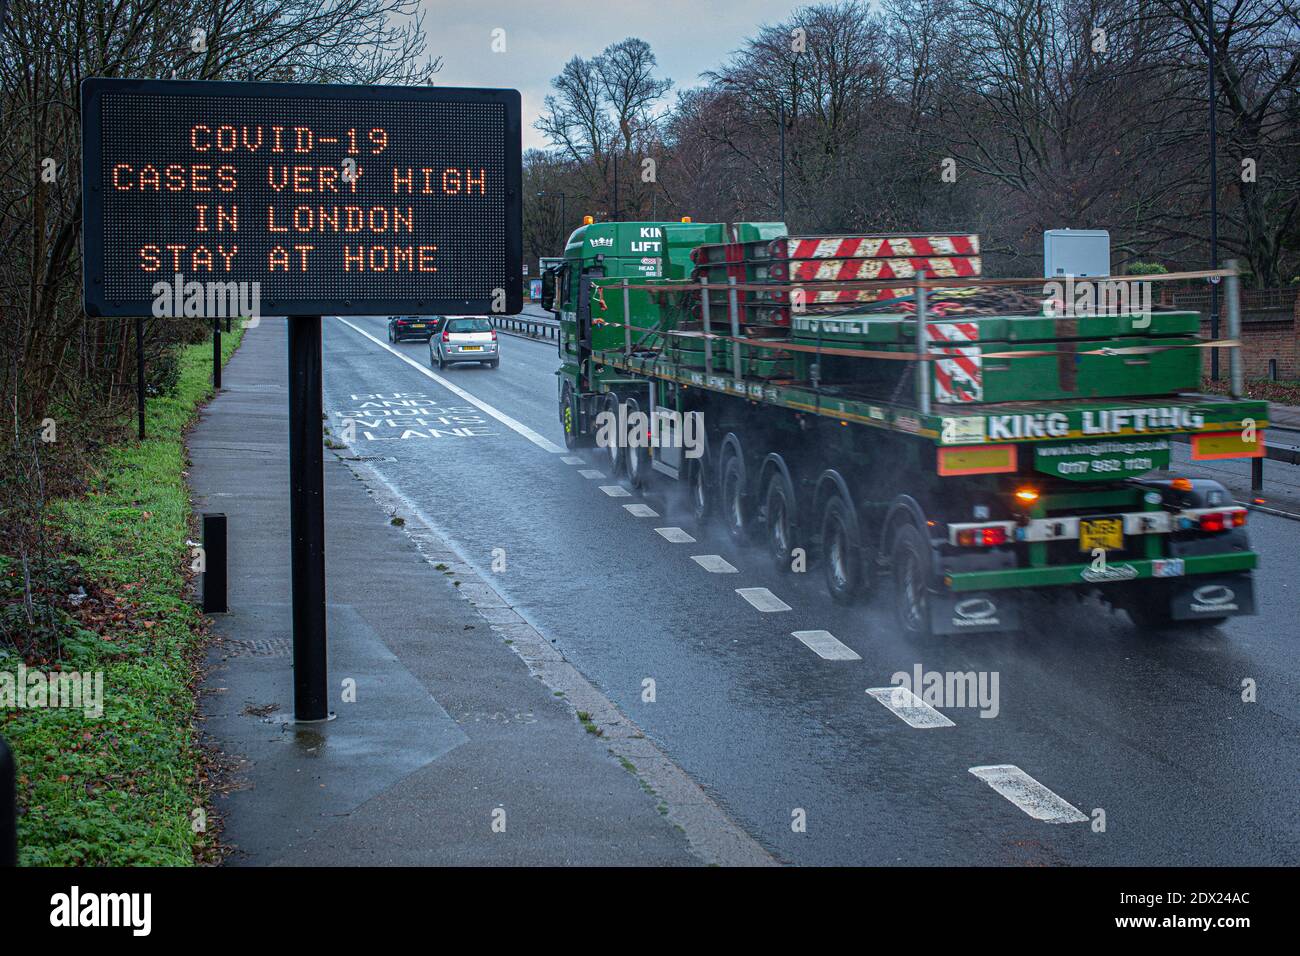 Great Britain/A sign, on A3 road a major road connecting London in Southern England,instructs to stay home during the Covid-19 coronavirus outbreak. Stock Photo